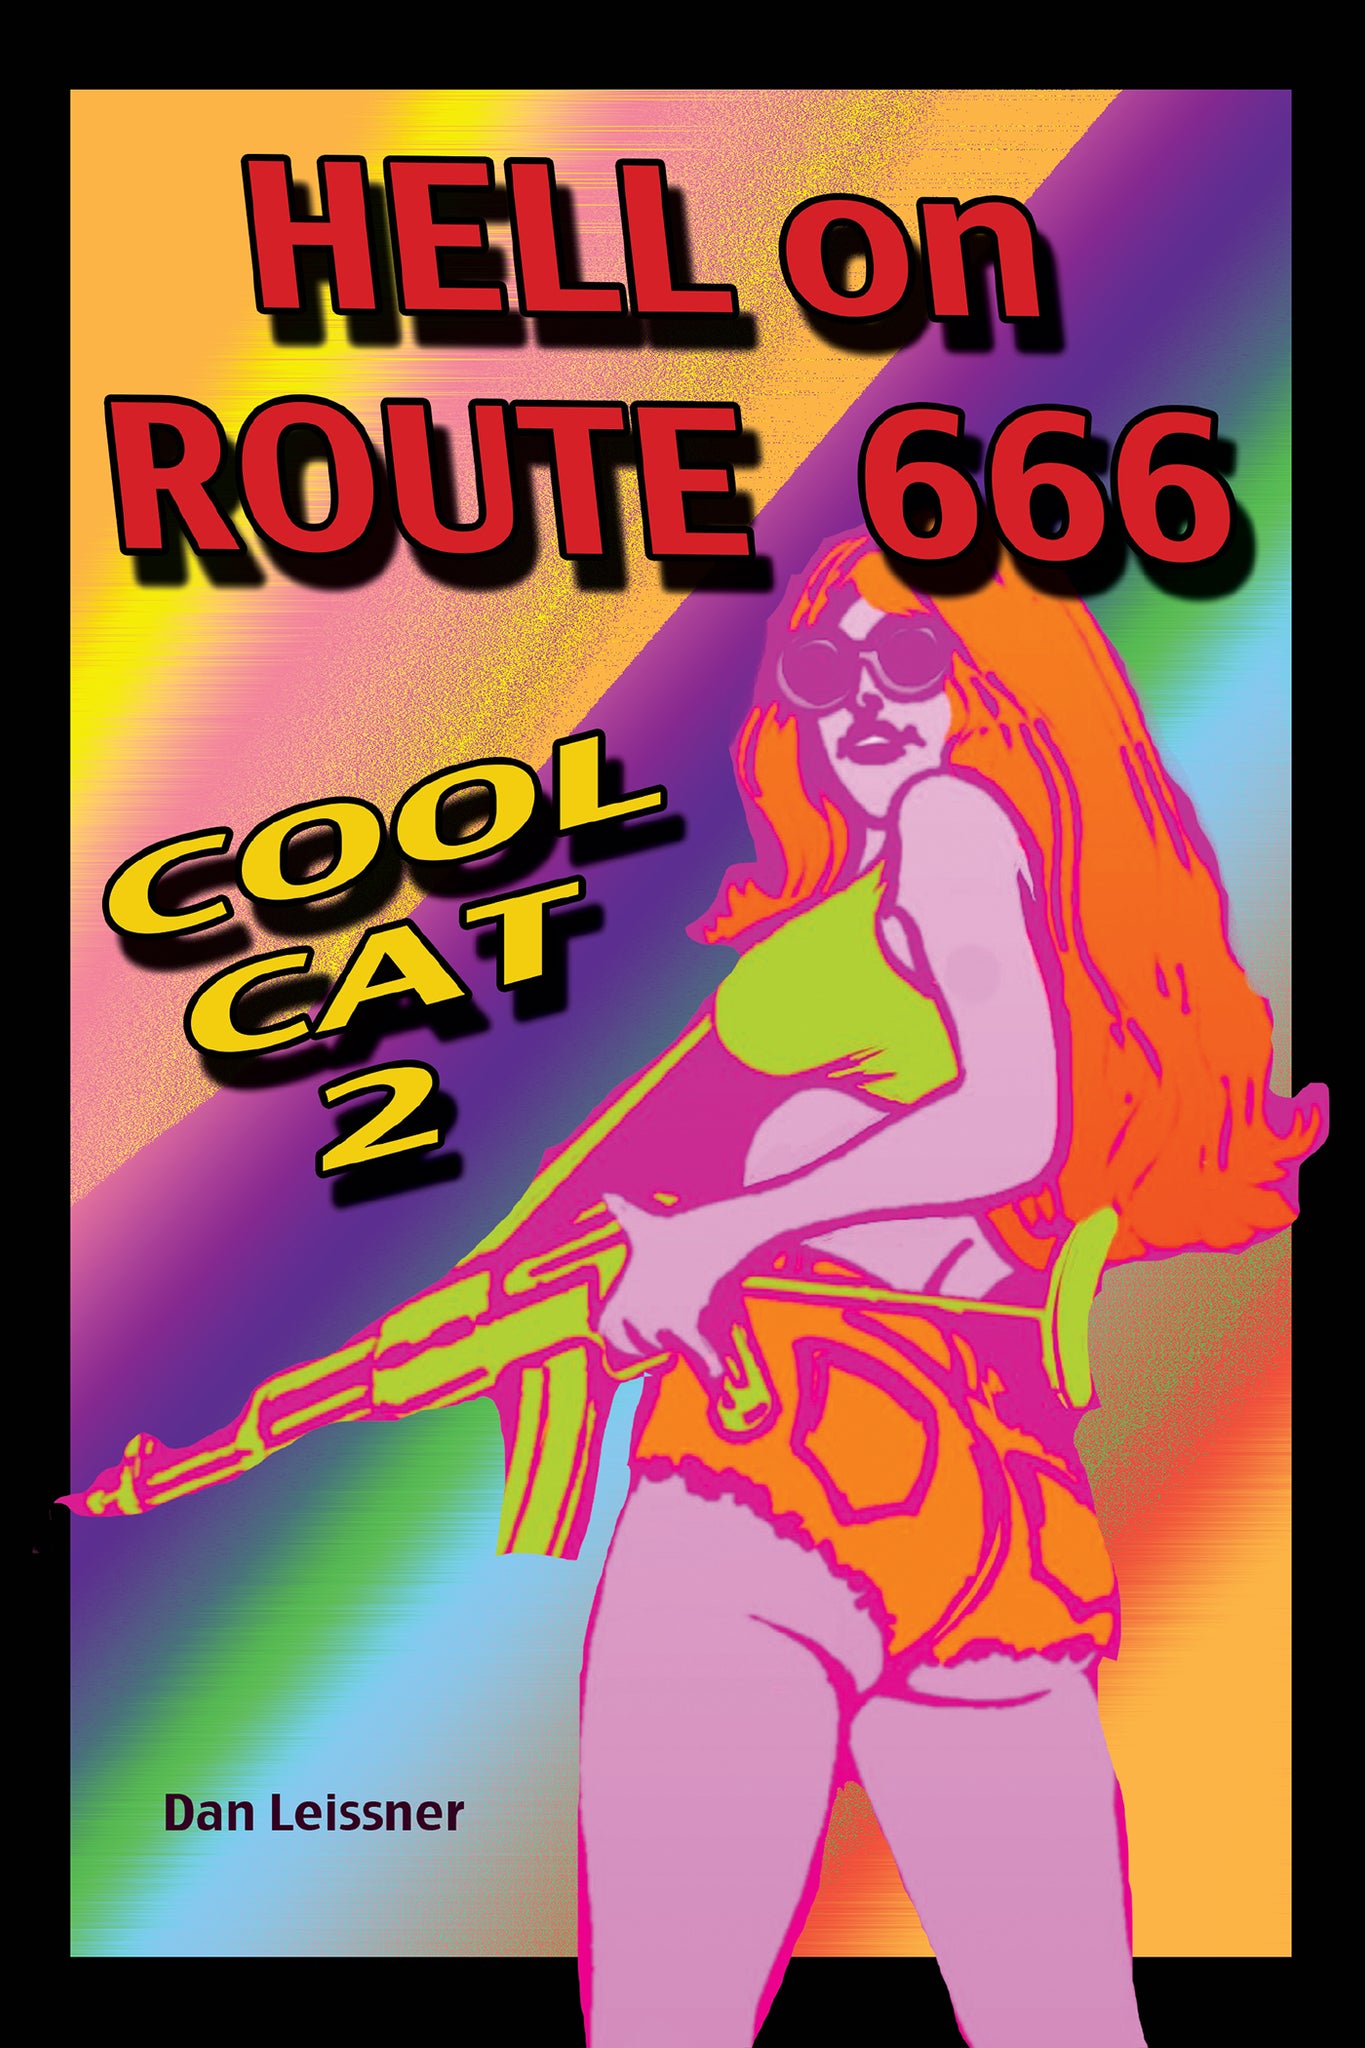 Hell on Route 666: Cool Cat 2 (ebook) - BearManor Manor